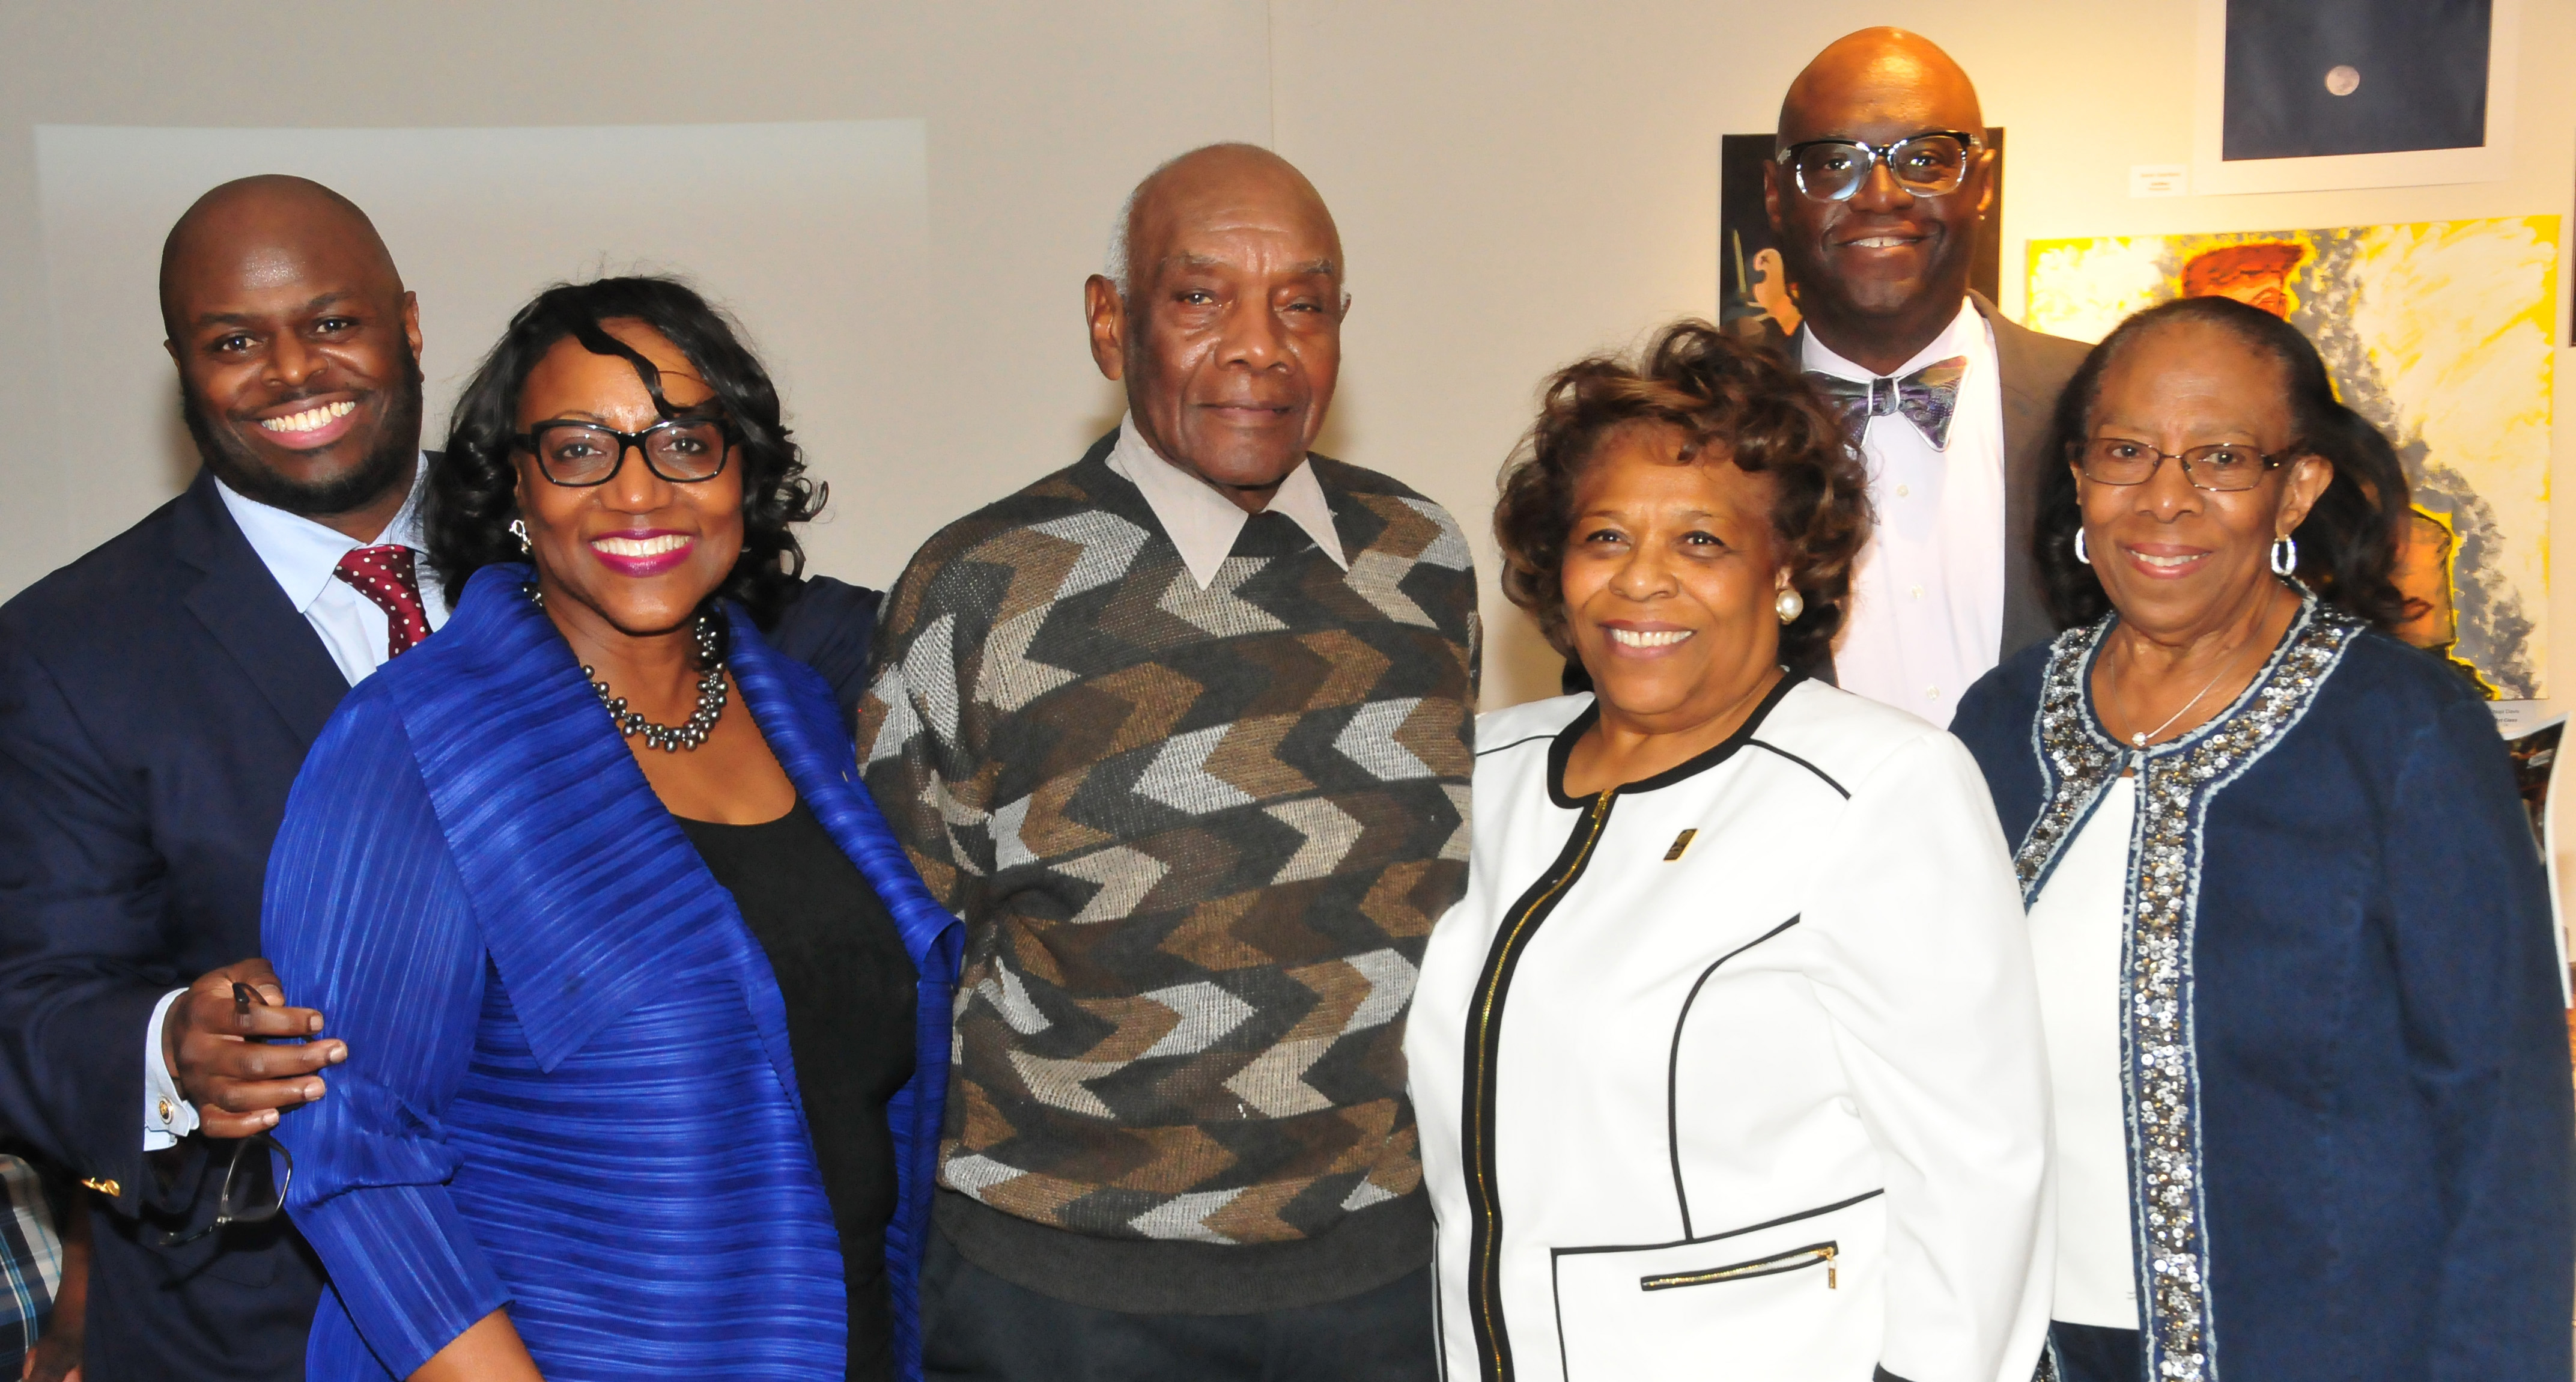 (L-r) Provost Tony Allen, Institutional Advancement VP Vita Pickrum, Douglas Gibson, DSU Acting President Wilma Mishoe, DSU Trustee John Allen and DSU alumna Reba Hollingsworth gather at a reception in honor of Mr. Gibson and his hand-carved duck art. Mr. Gibson donated 10 works to the University.